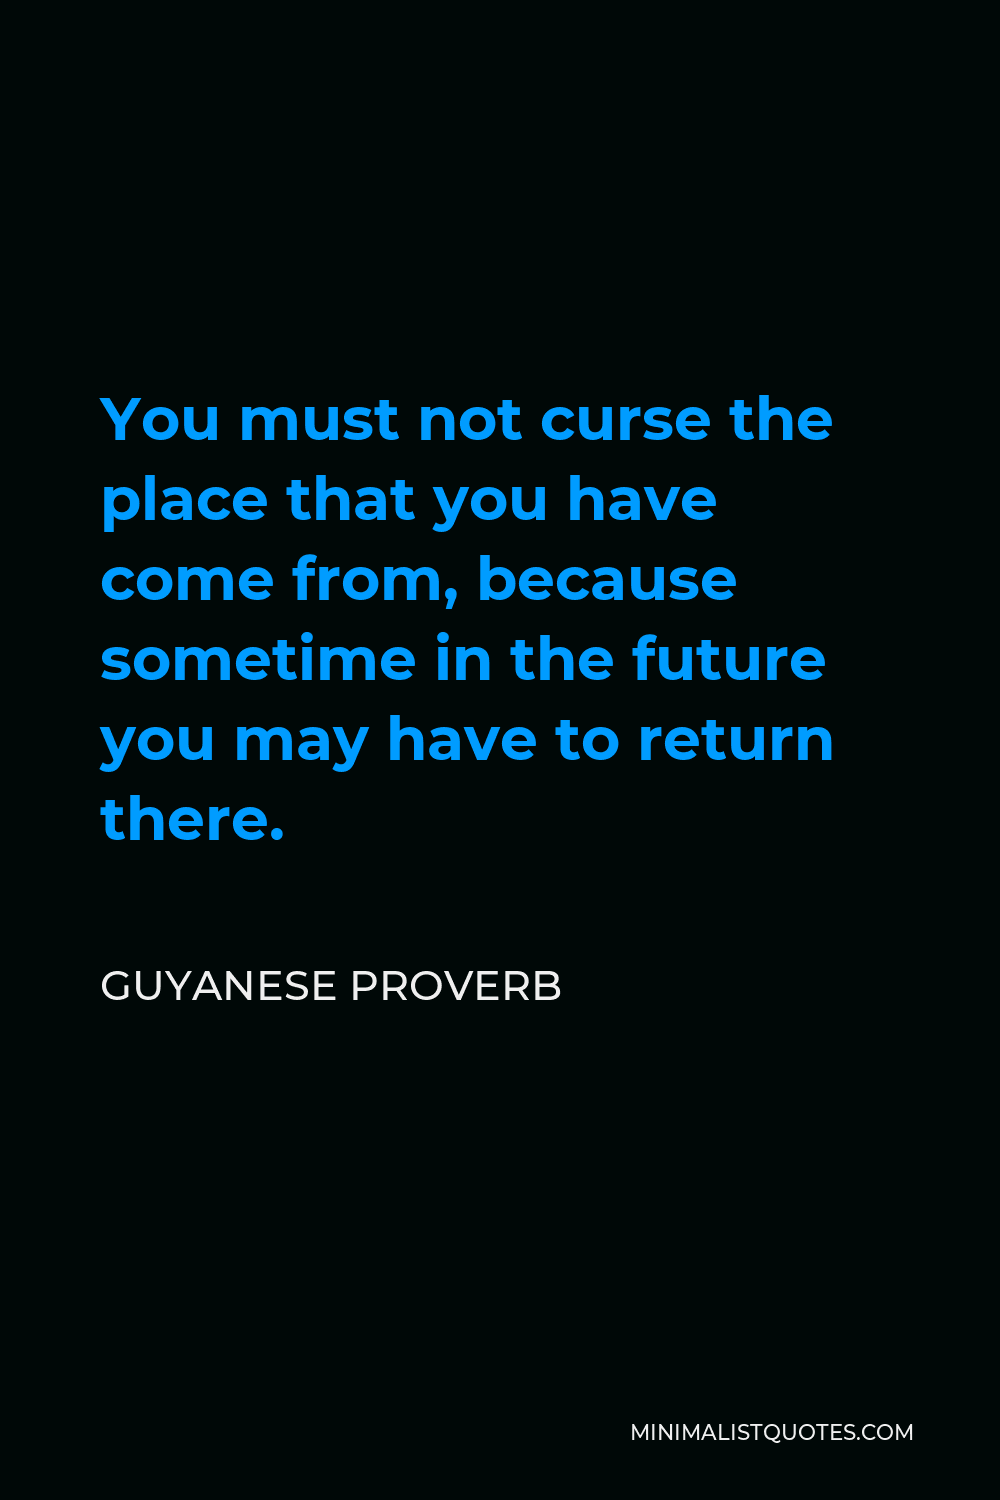 Guyanese Proverb Quote - You must not curse the place that you have come from, because sometime in the future you may have to return there.